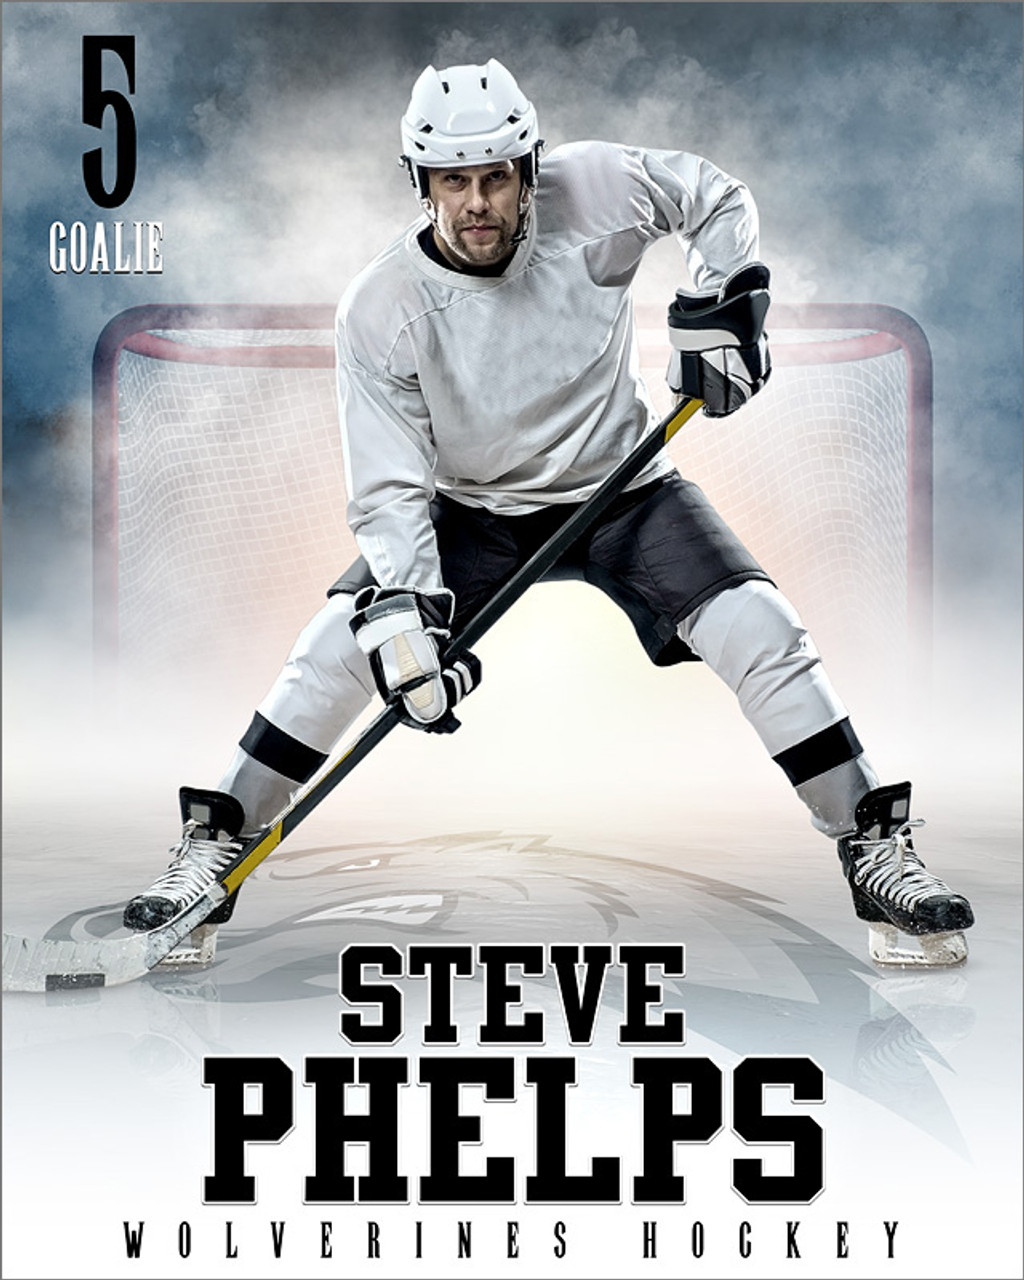 16x20 SPORTS POSTER PHOTO TEMPLATE - FROZEN - CUSTOM PHOTOSHOP LAYERED SPORTS TEMPLATE